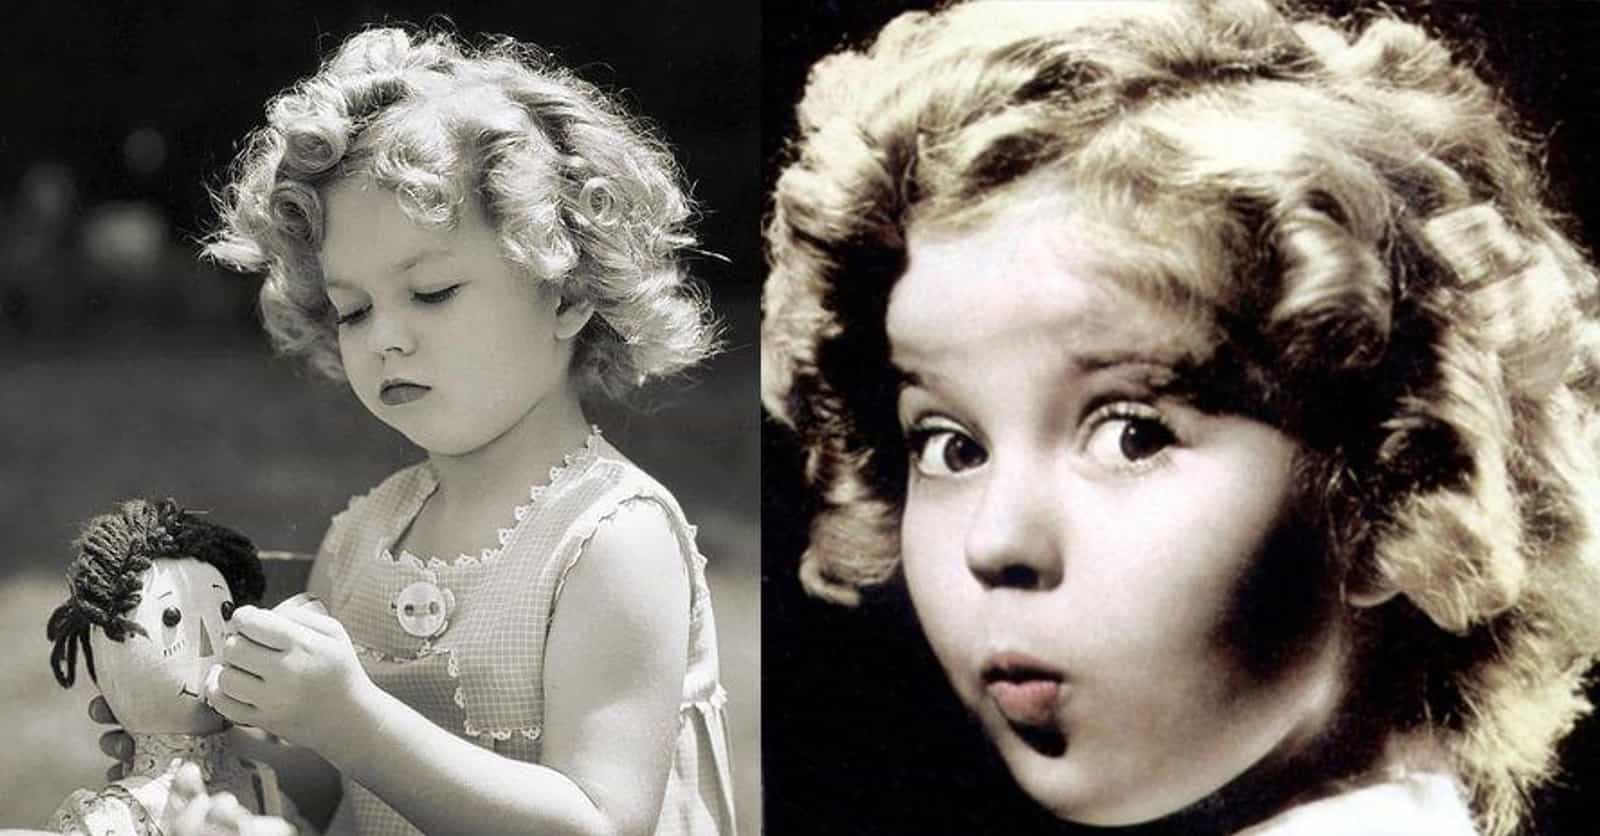 Though She Suffered Abuse, Shirley Temple's Story Is A Model Of Child Star Resilience